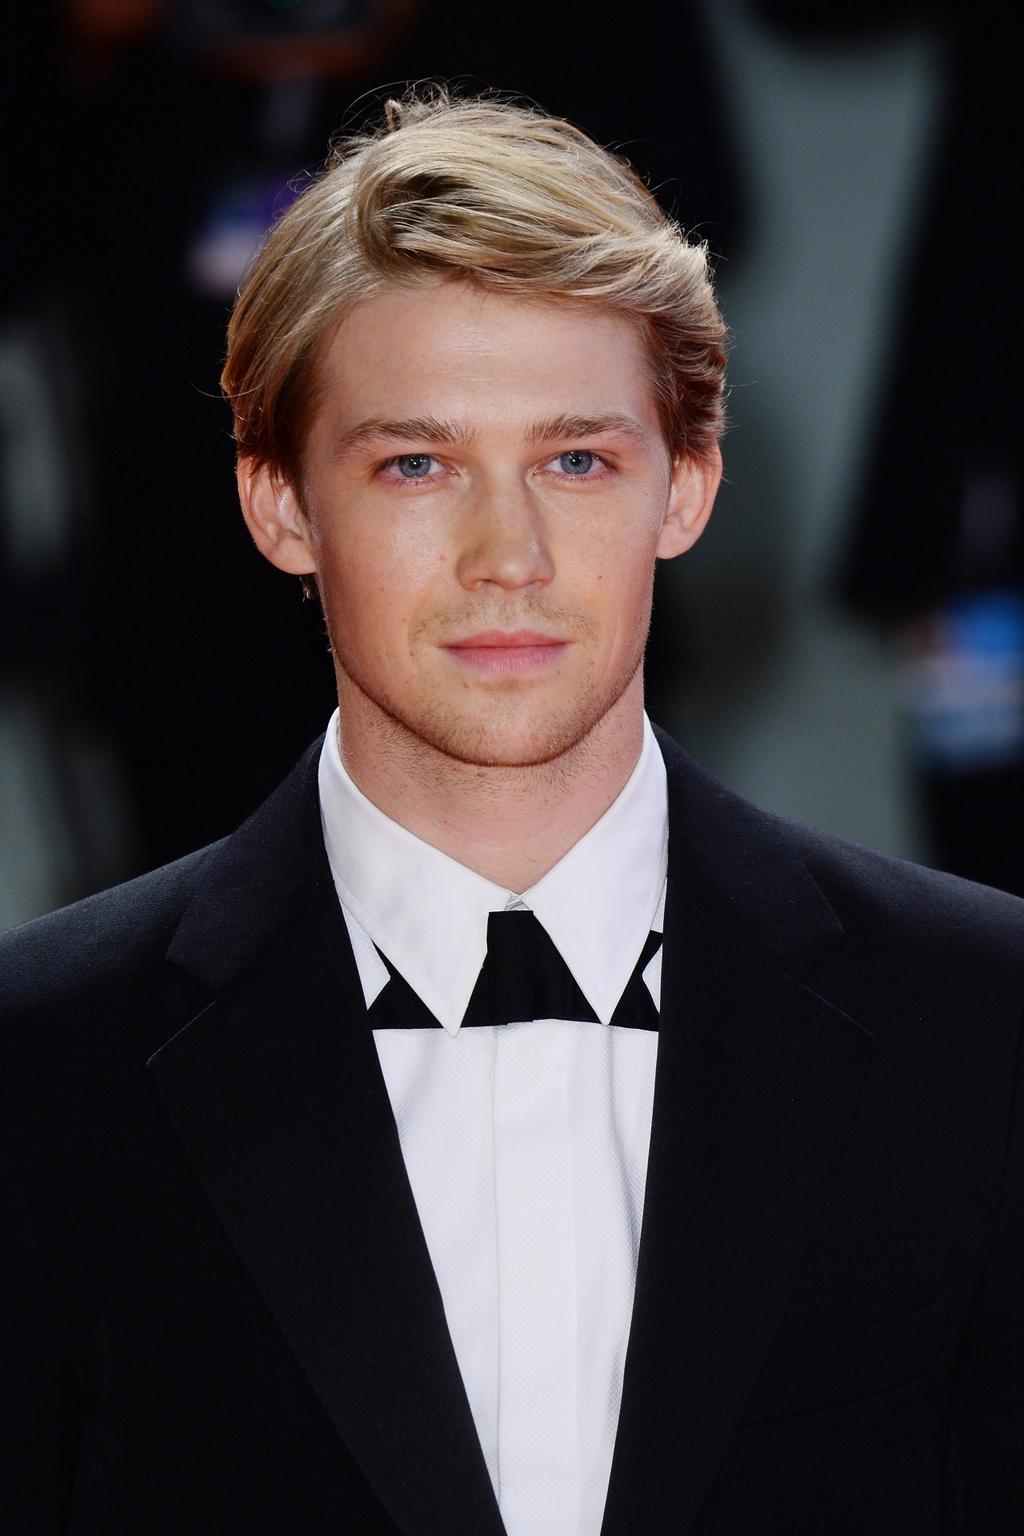 Joe Alwyn Breaks His Silence On His Relationship With Taylor